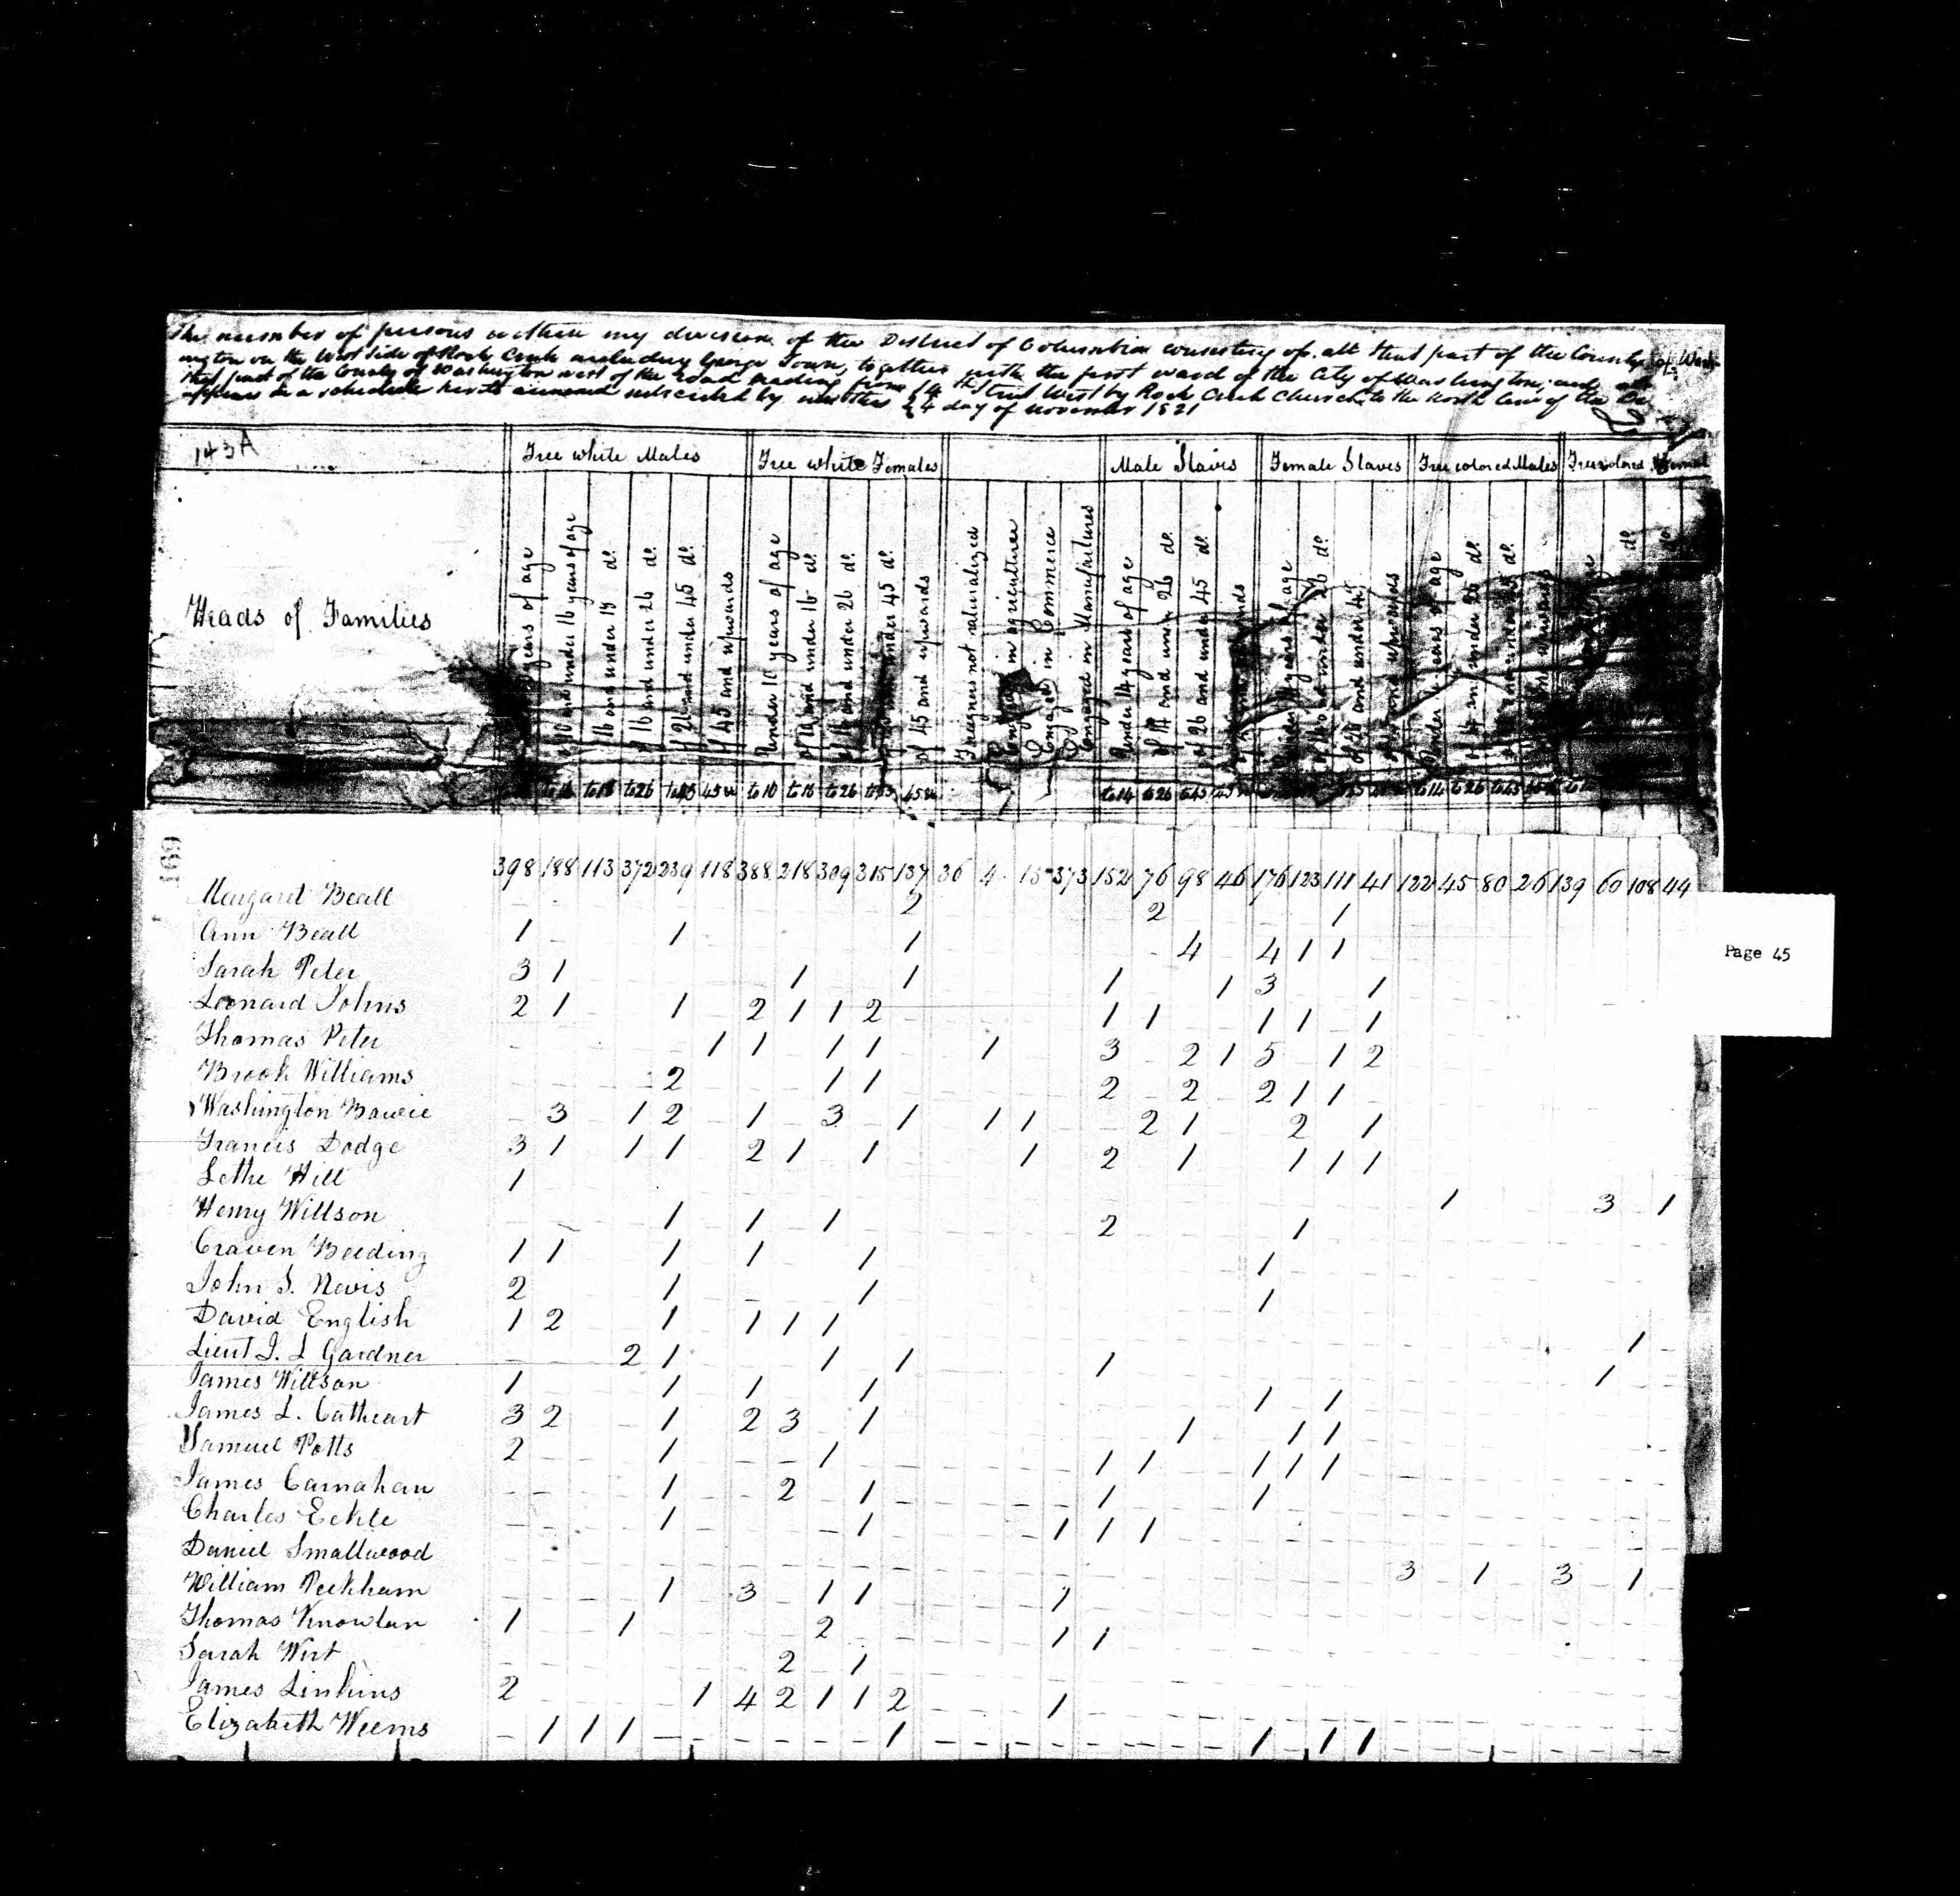 1820 Census Entry for James Carnahan